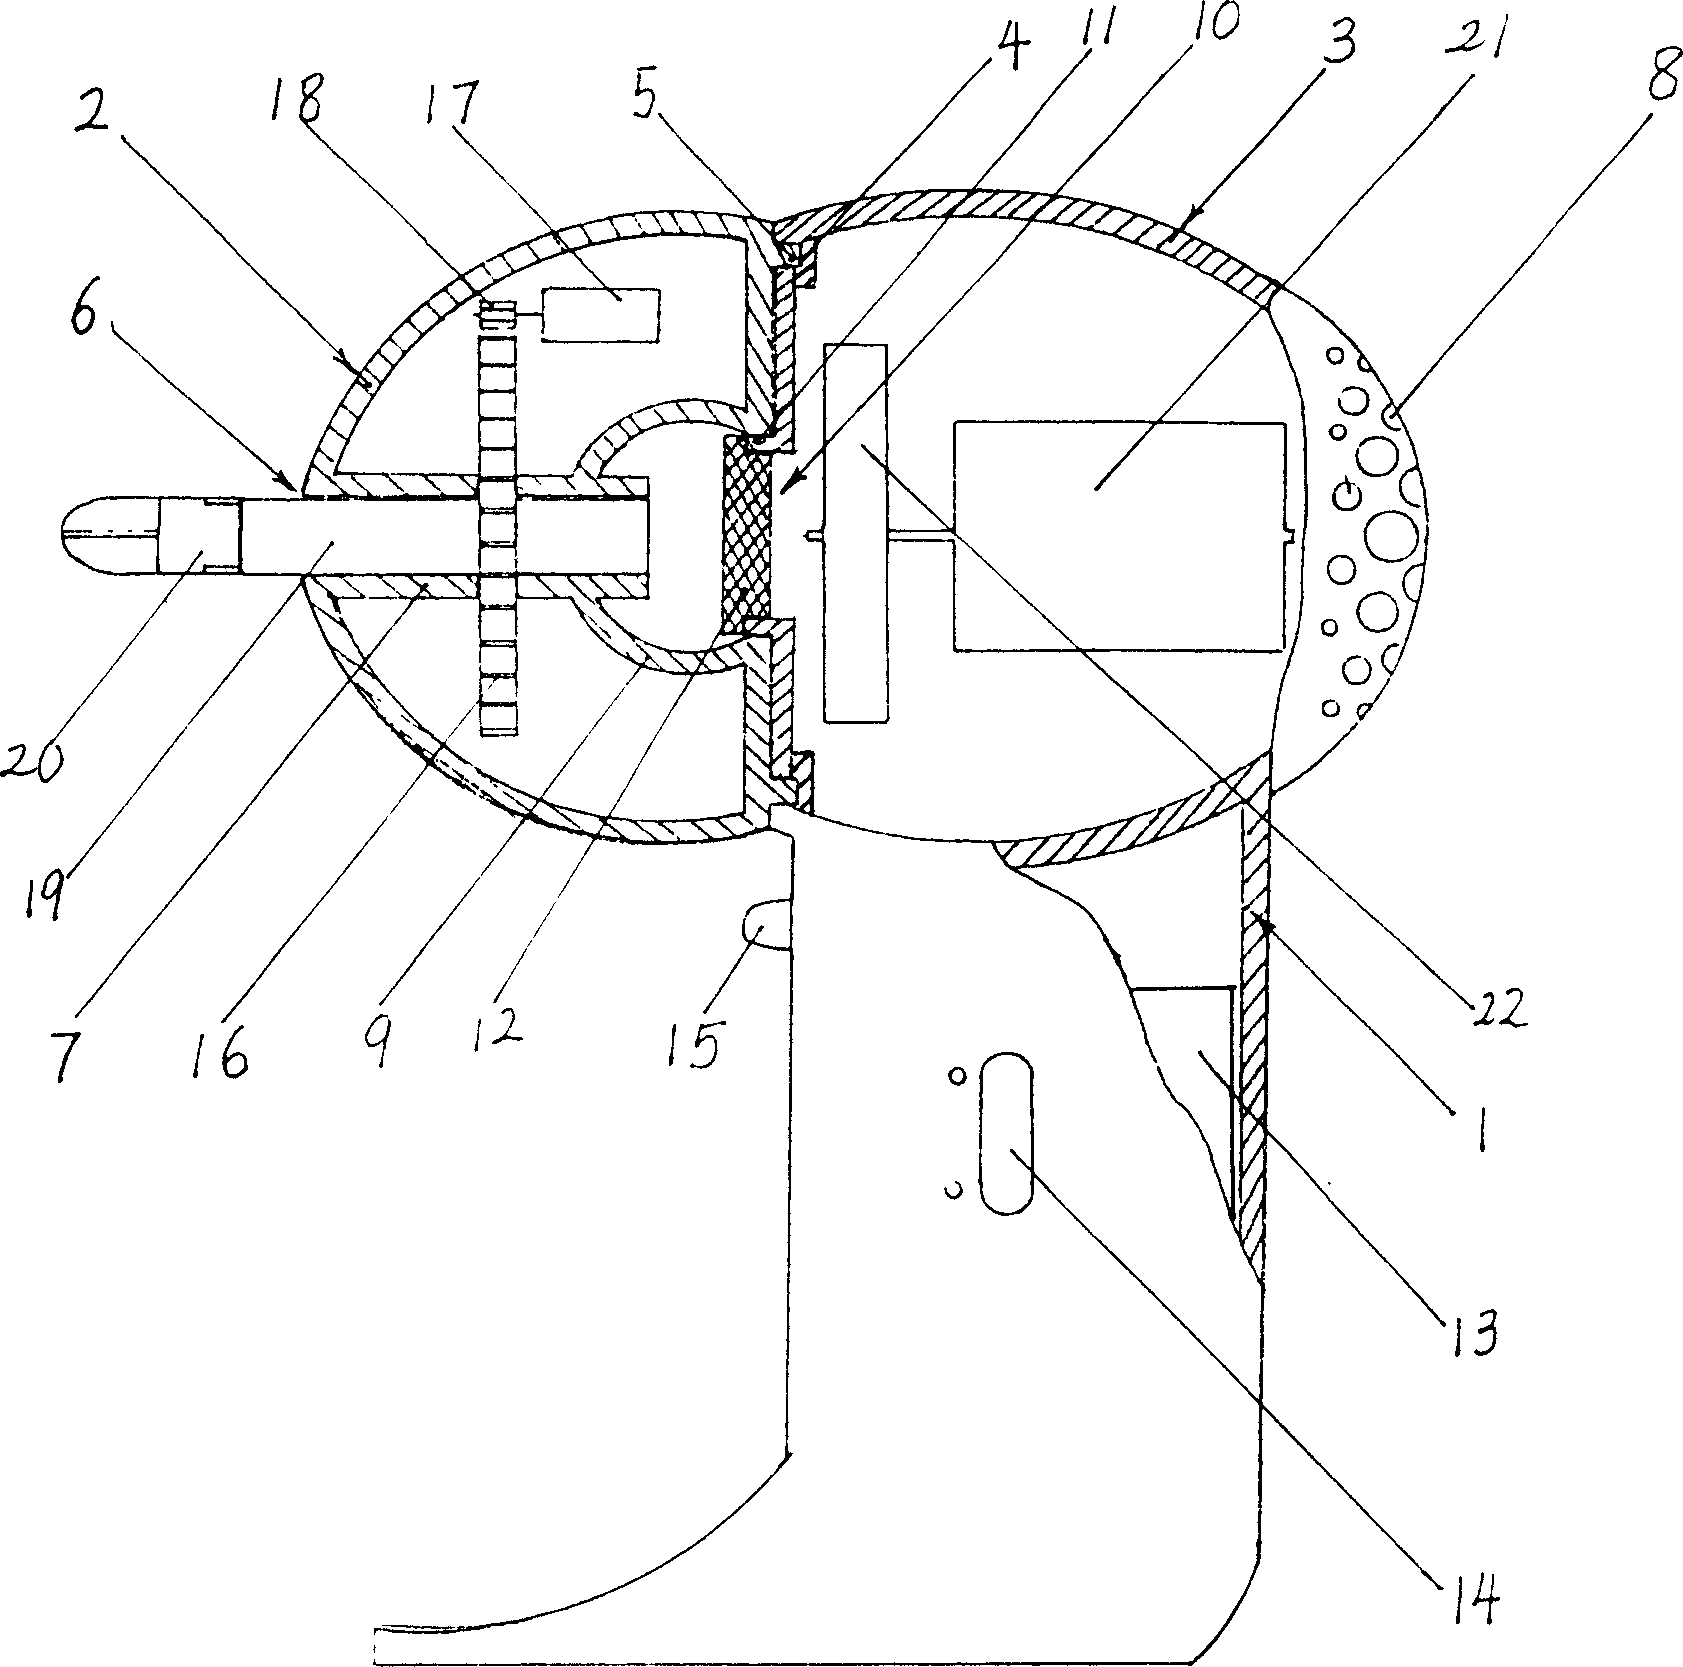 Electric apparatus for removing earwax